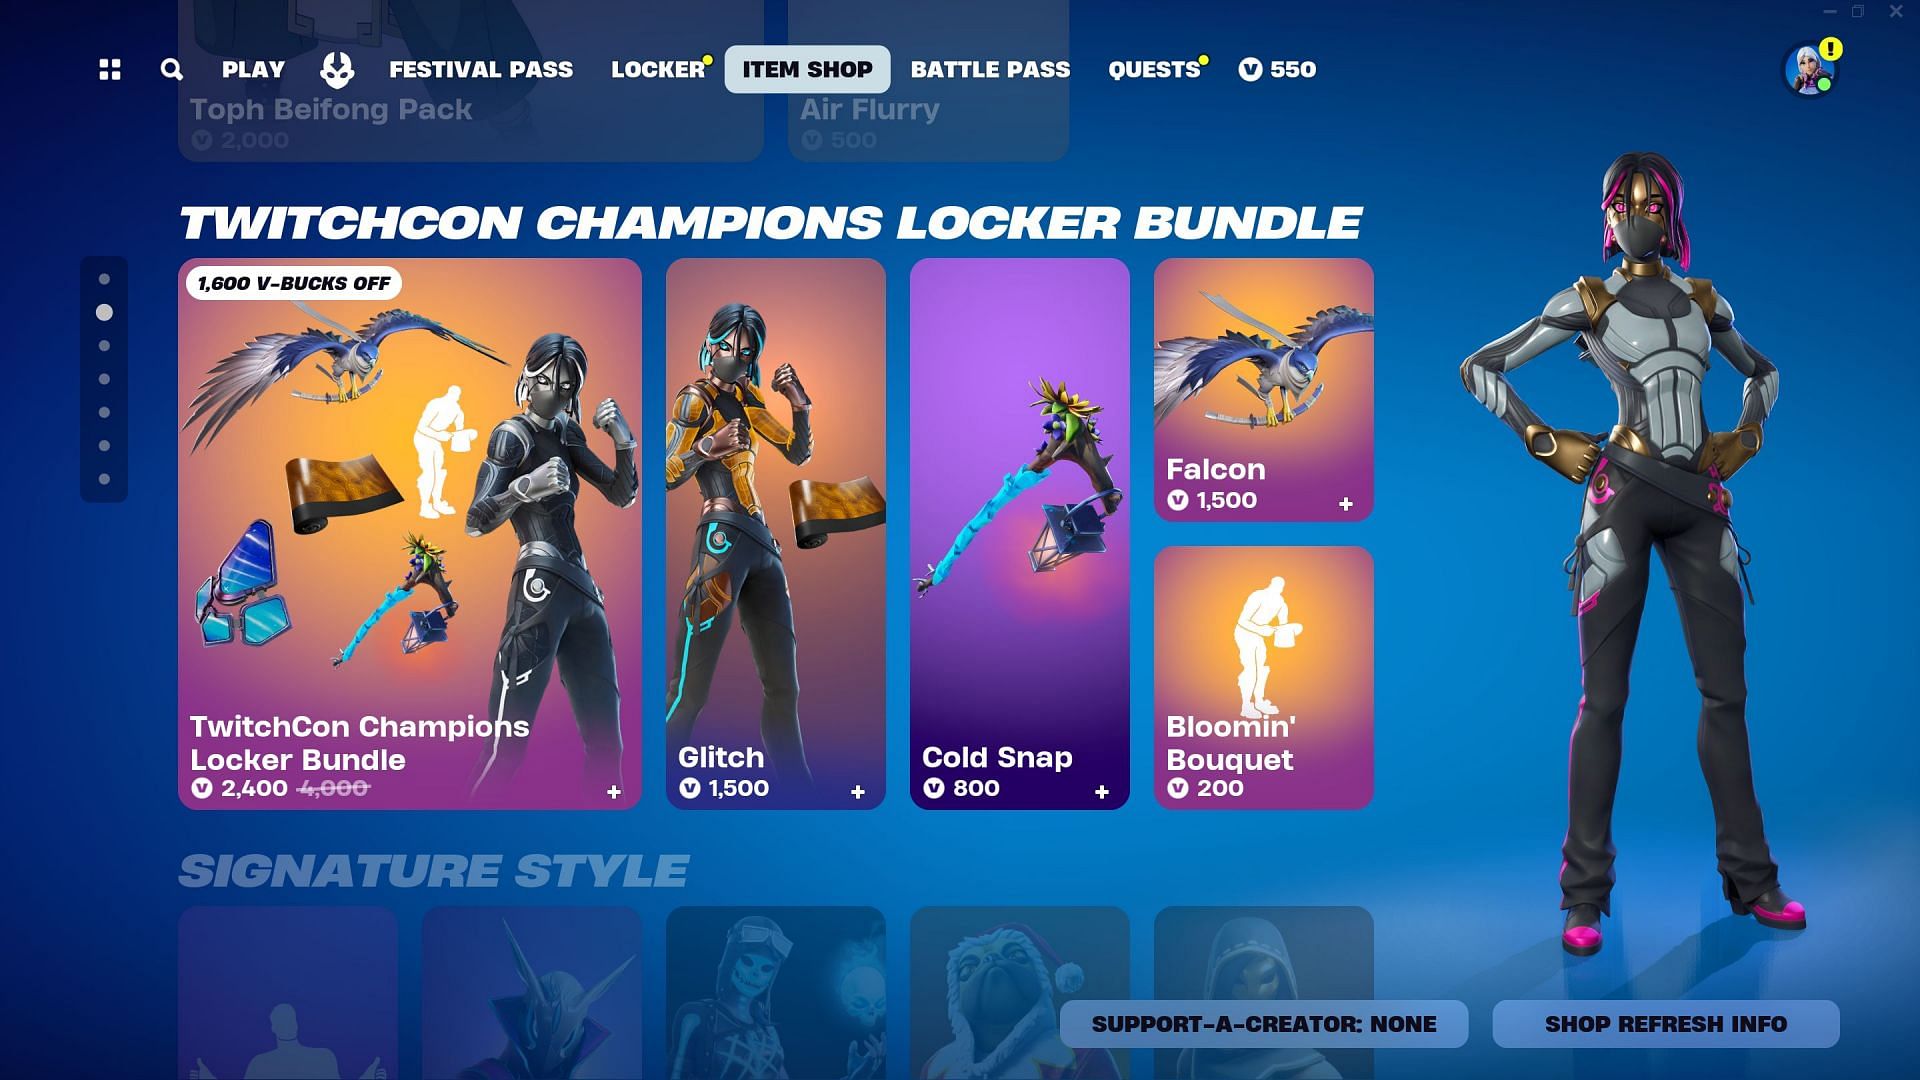 Twitchcon Champions Locker Bundle is currently listed in the Item Shop (Image via Epic Games/Fortnite)